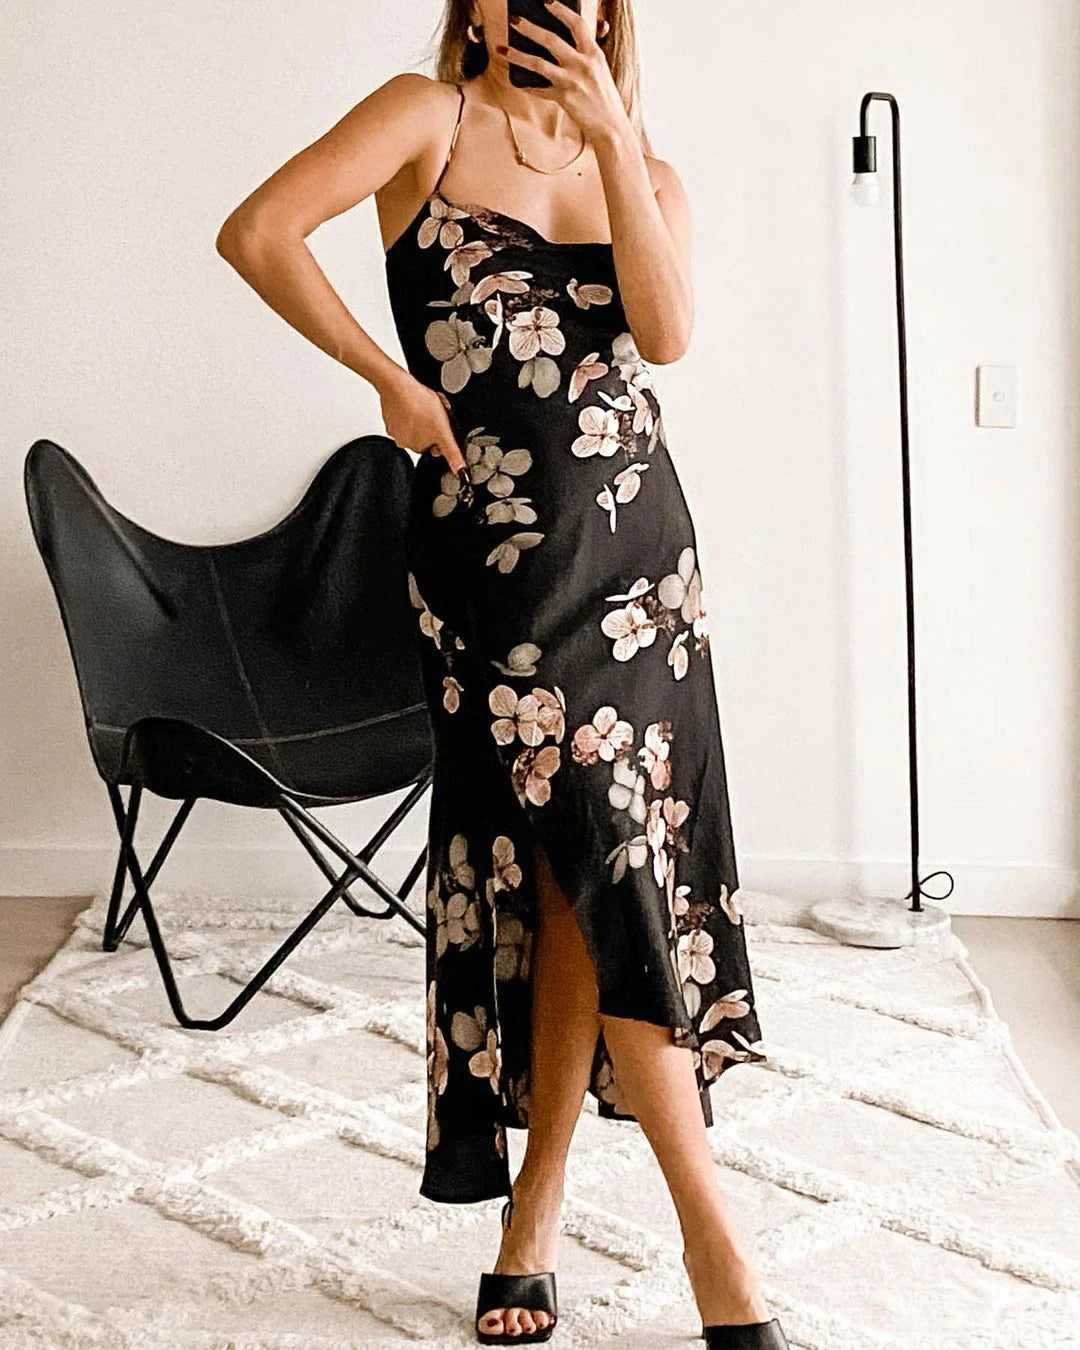 Nova Slip Dress: The Nova Slip Dress is a stunning cowl neck slip maxi with a sexy leg split and back tie feature

Midi length
Side slit
Adjustable straps
Tie feature on back
True to - Ciao Bella Dresses - Ebby and I